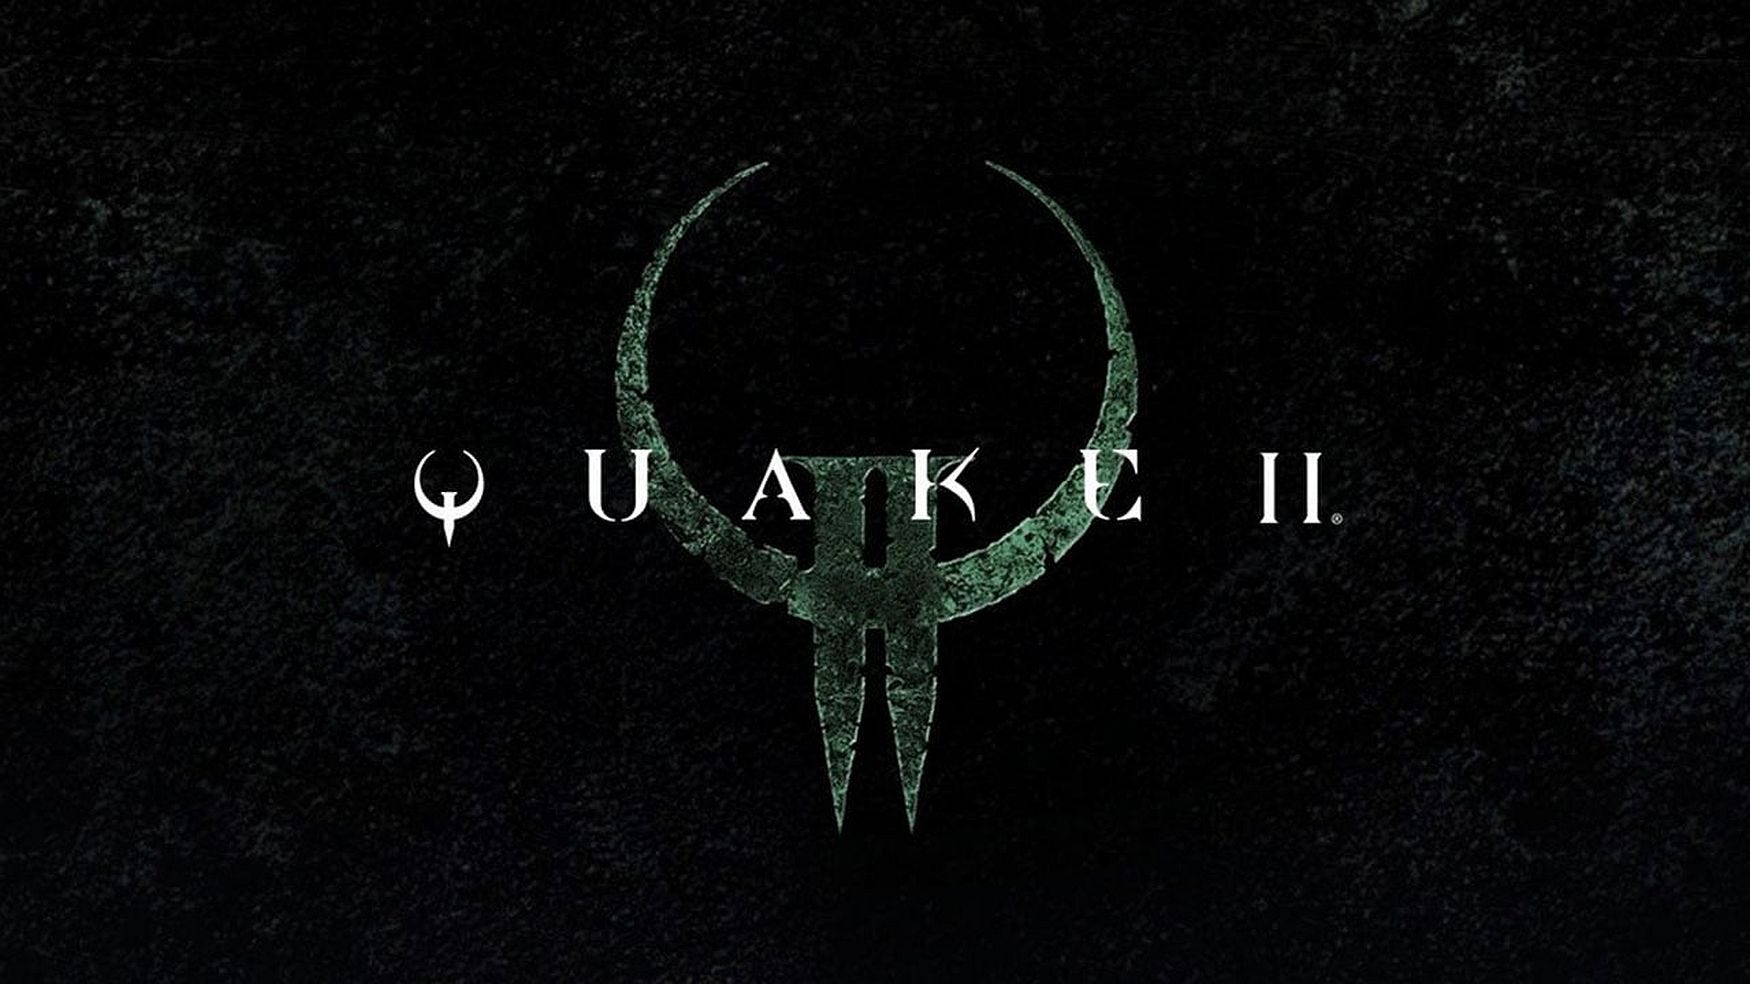 Quake 2 enhanced is here: Relive the classic with updated graphics and new content